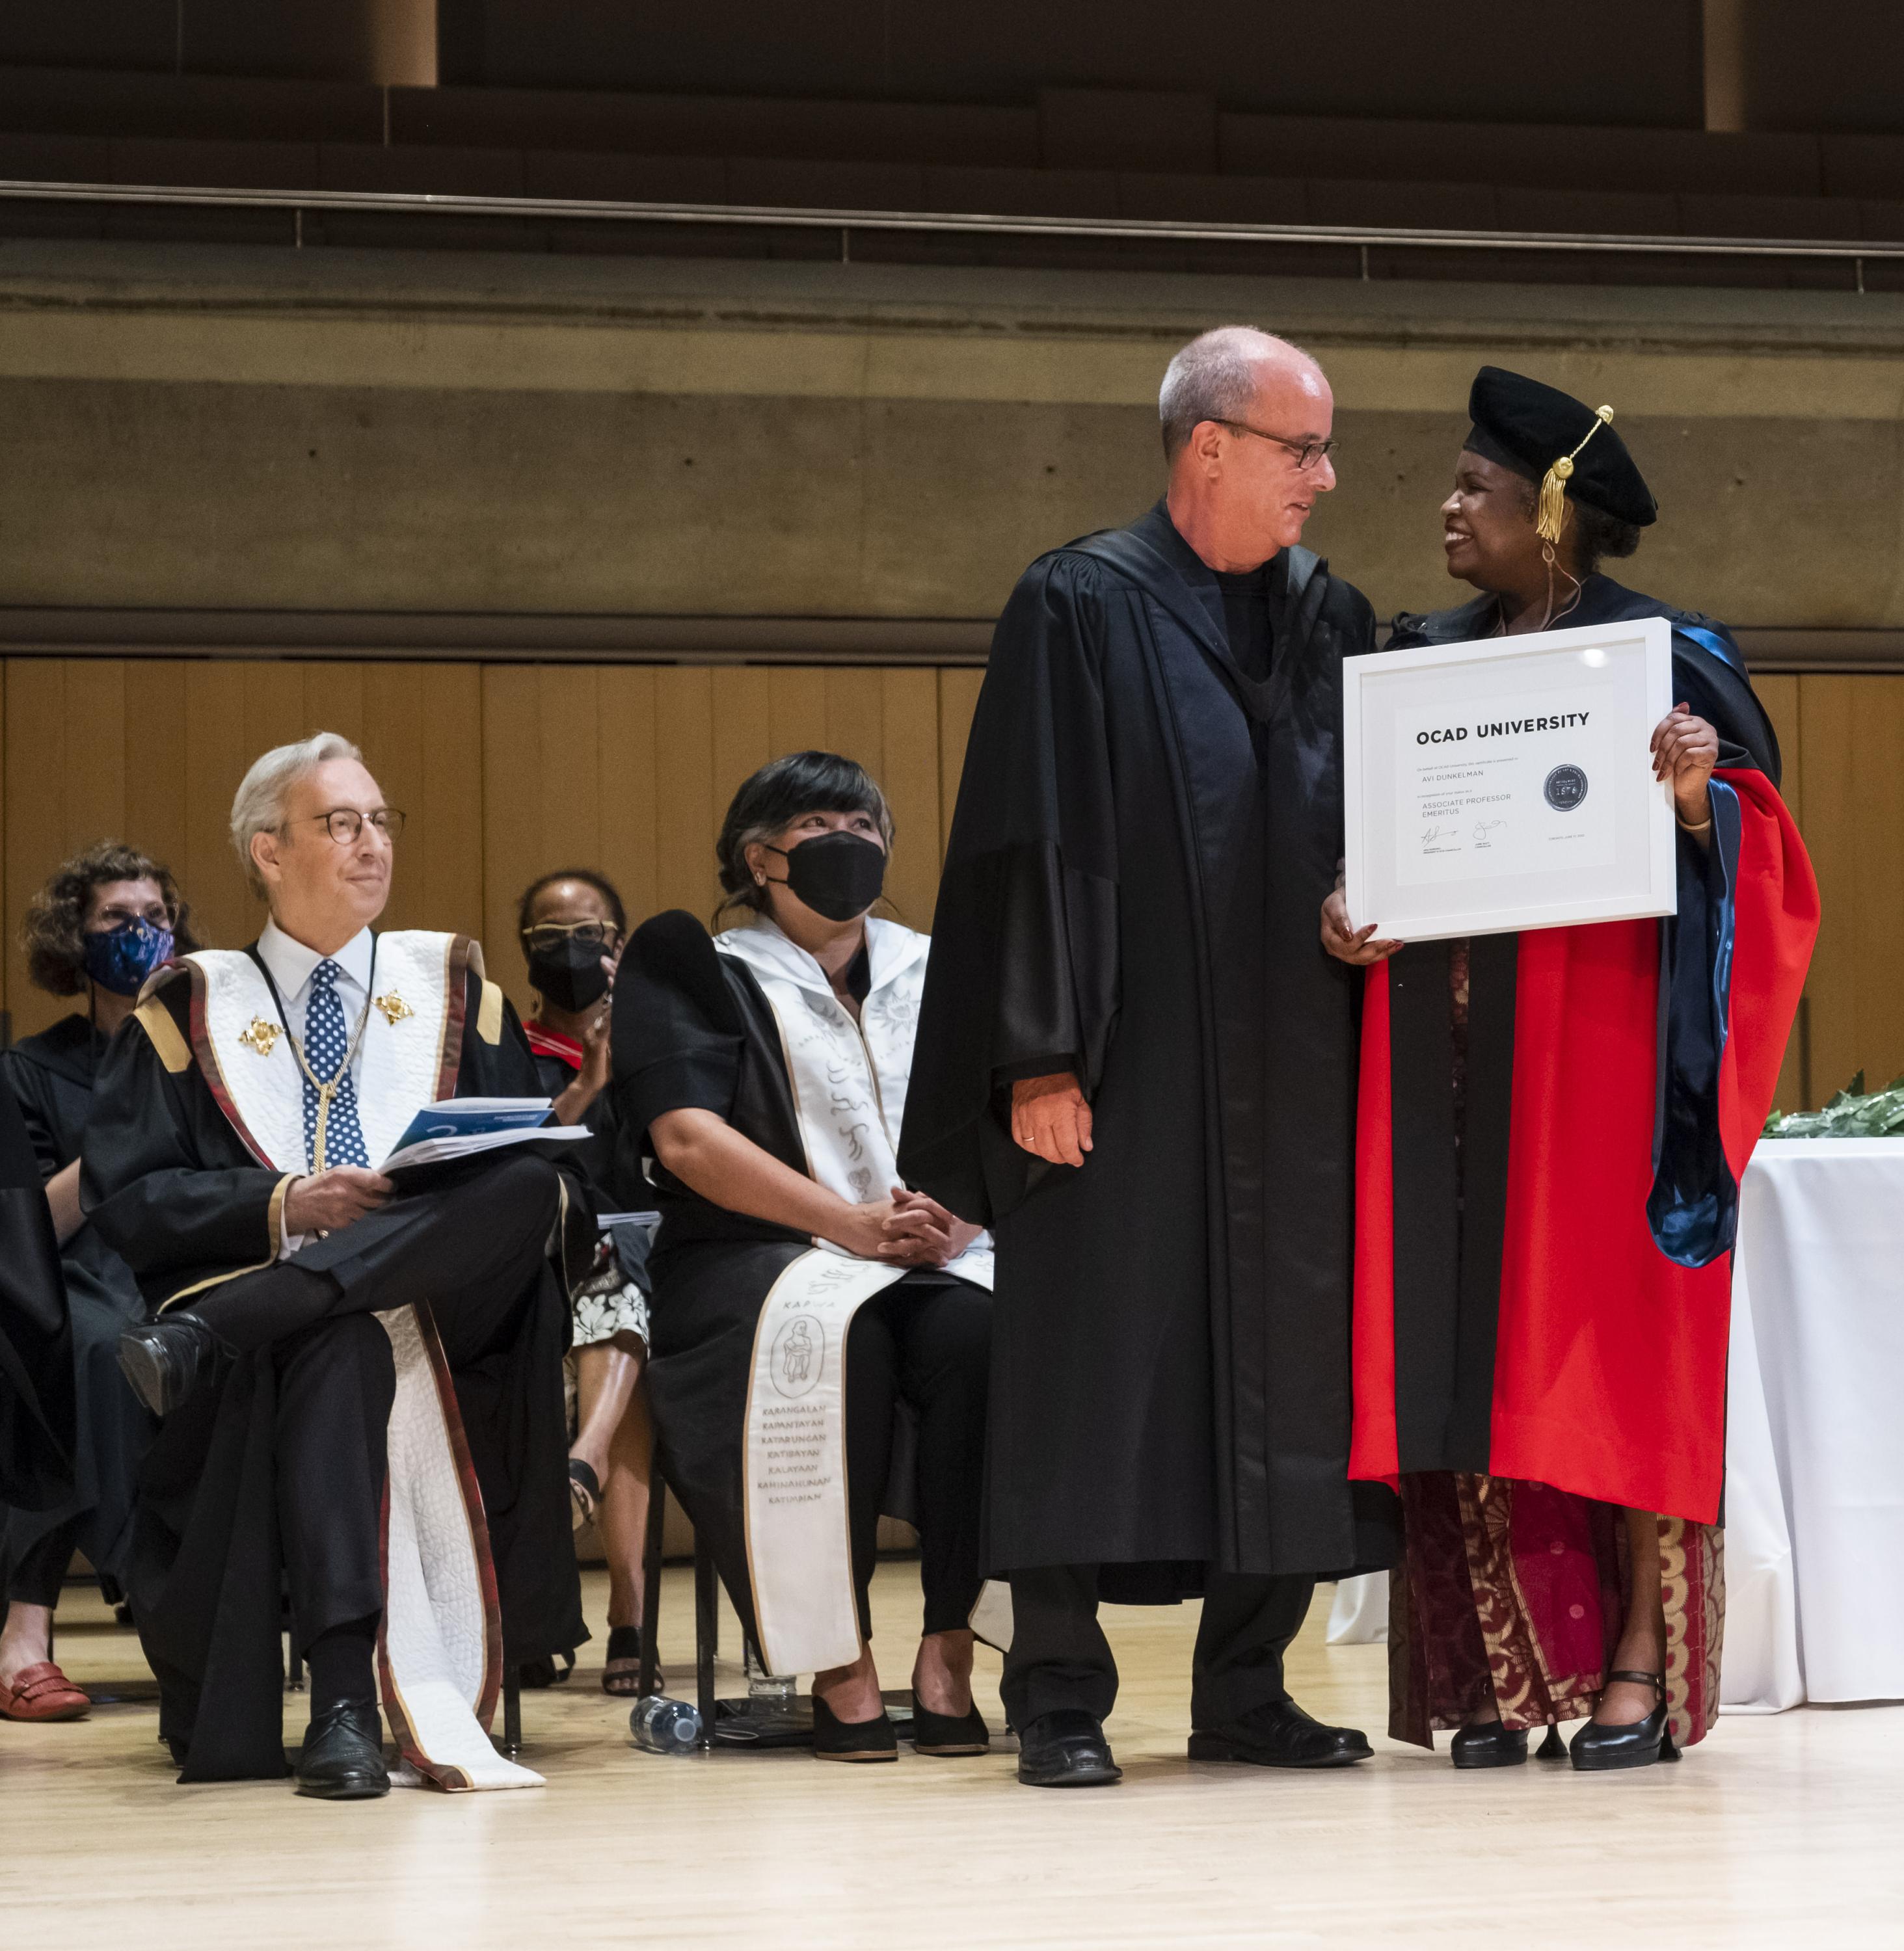 People in graduation regalia standing on a stage. A man is presented with a framed document.